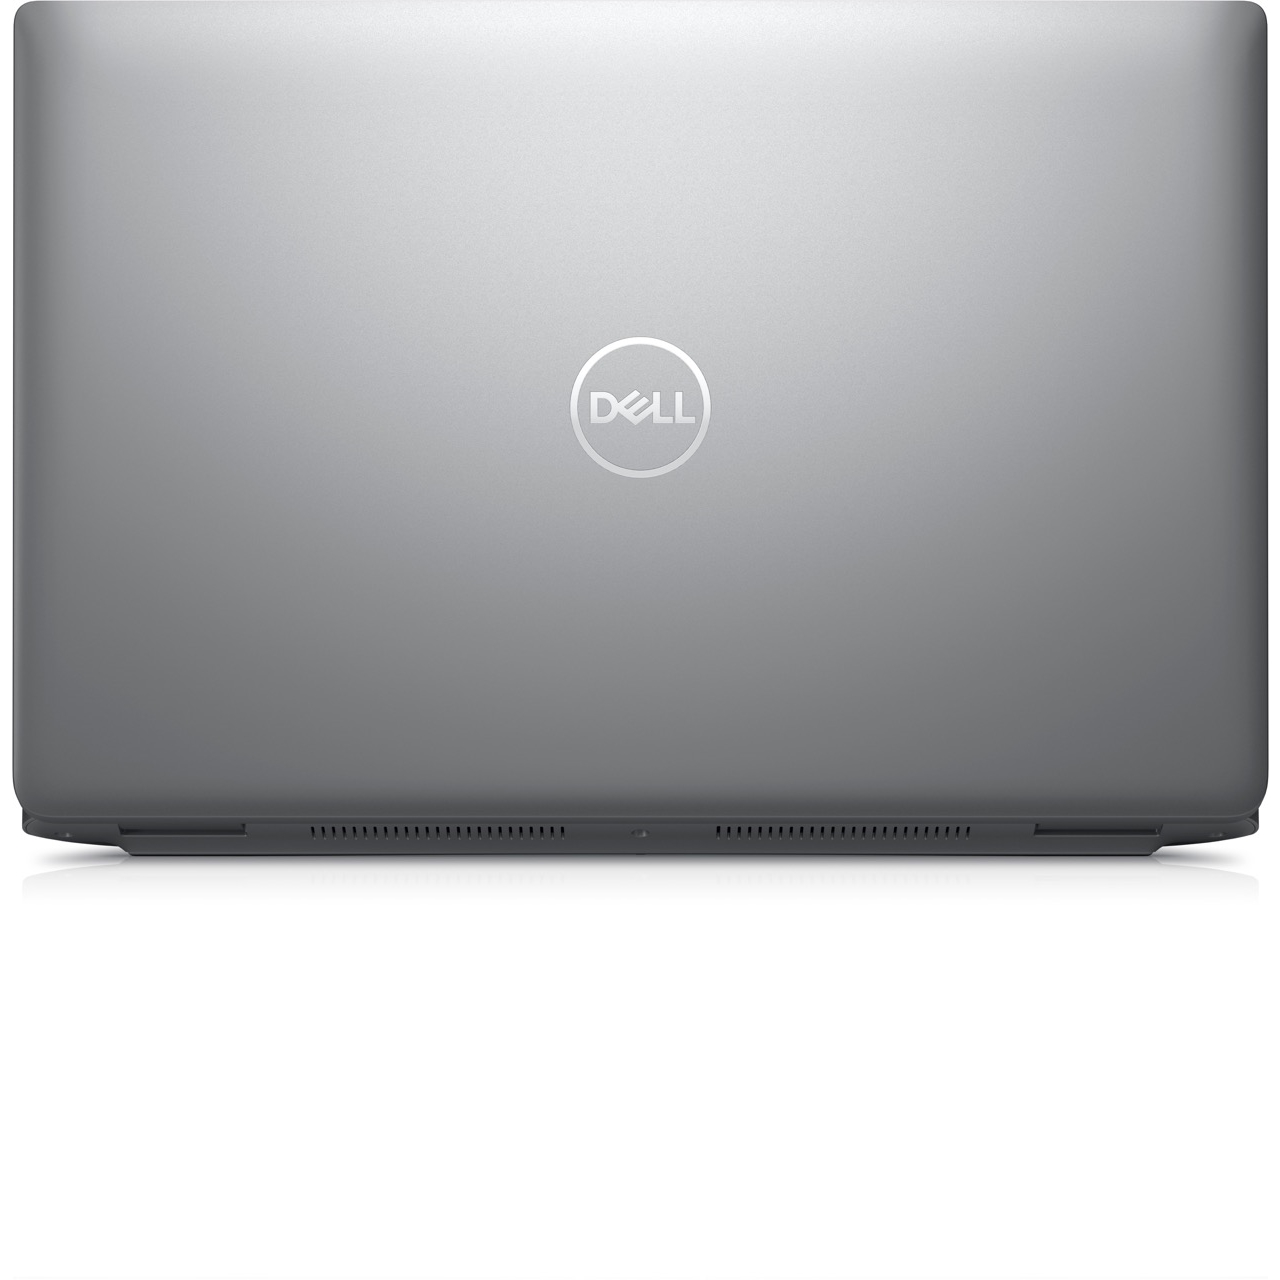 DELL M3581 I7-13700H 32GB 1TB NVME SSD 6GB RTX A1000 15.6" FREEDOS MOBILE WS